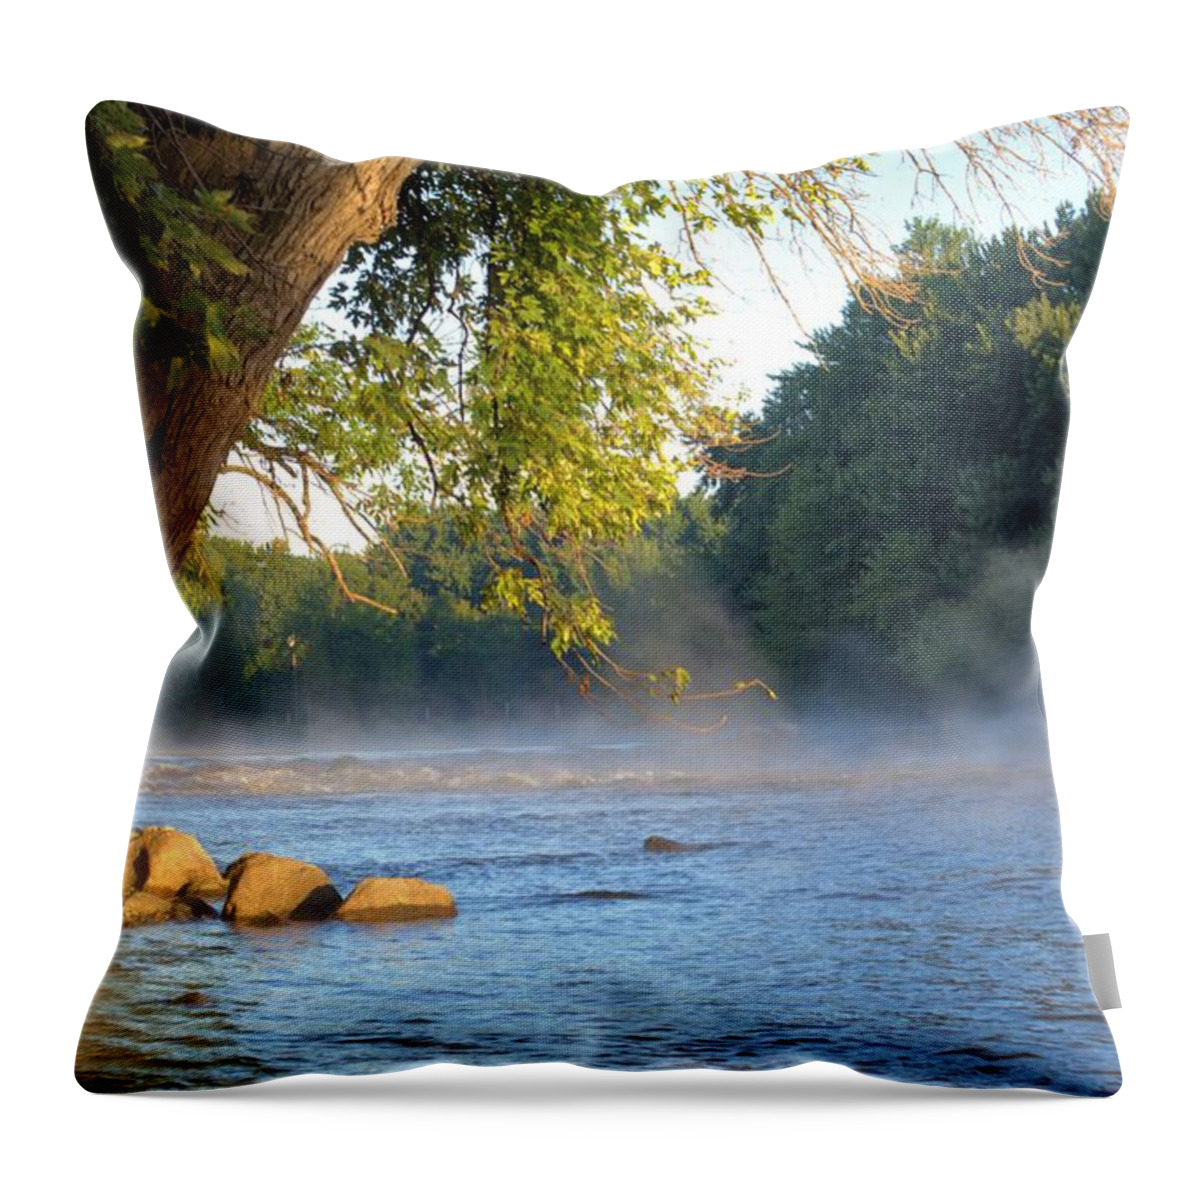 River Throw Pillow featuring the photograph Shell Rock 2 by Bonfire Photography